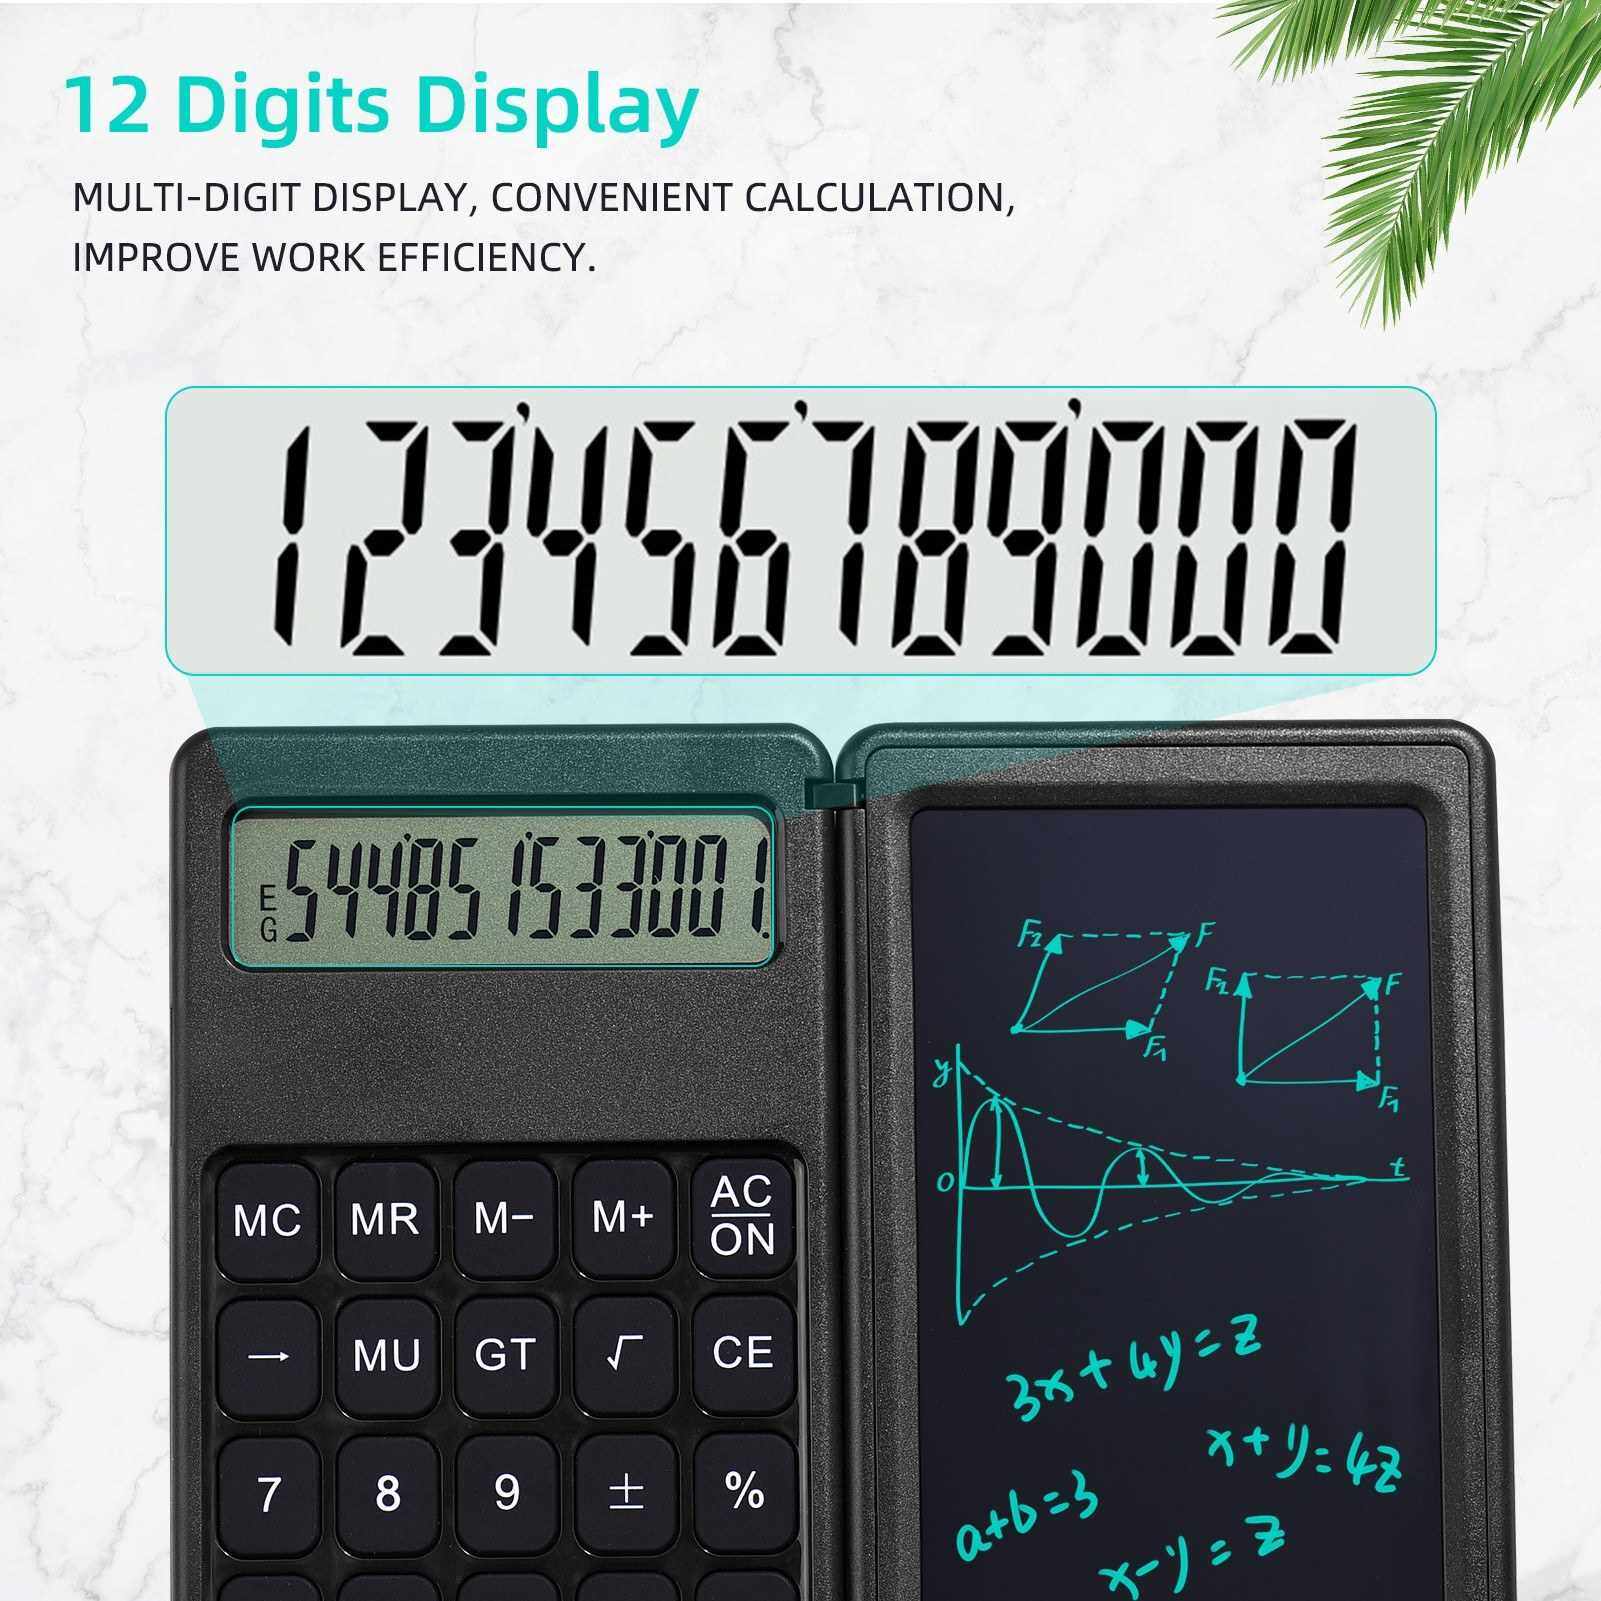 Foldable Calculator & 6 Inch LCD Writing Tablet Digital Drawing Pad 12 Digits Display with Stylus Pen Erase Button for Children Adults Home Office School Use (Black)